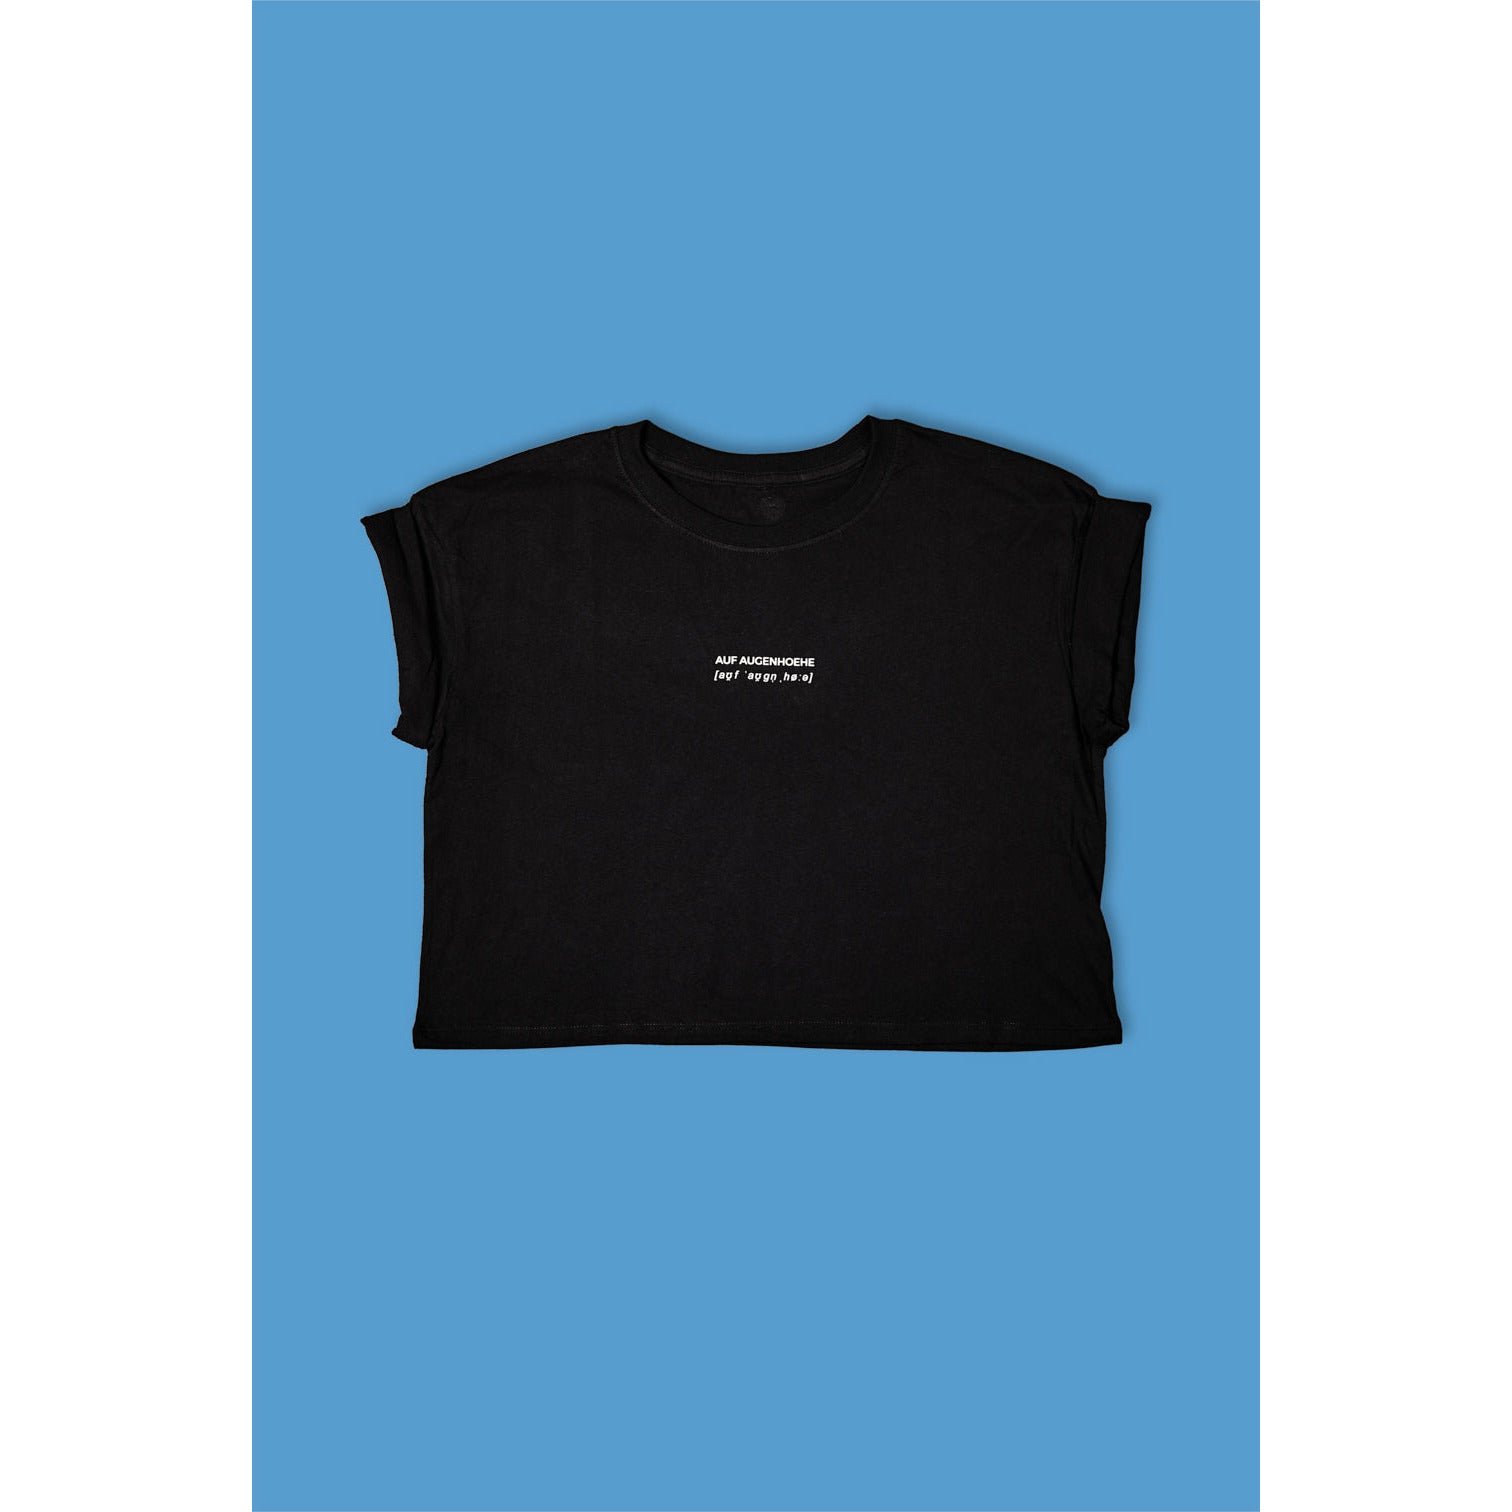 black crop top with small white text